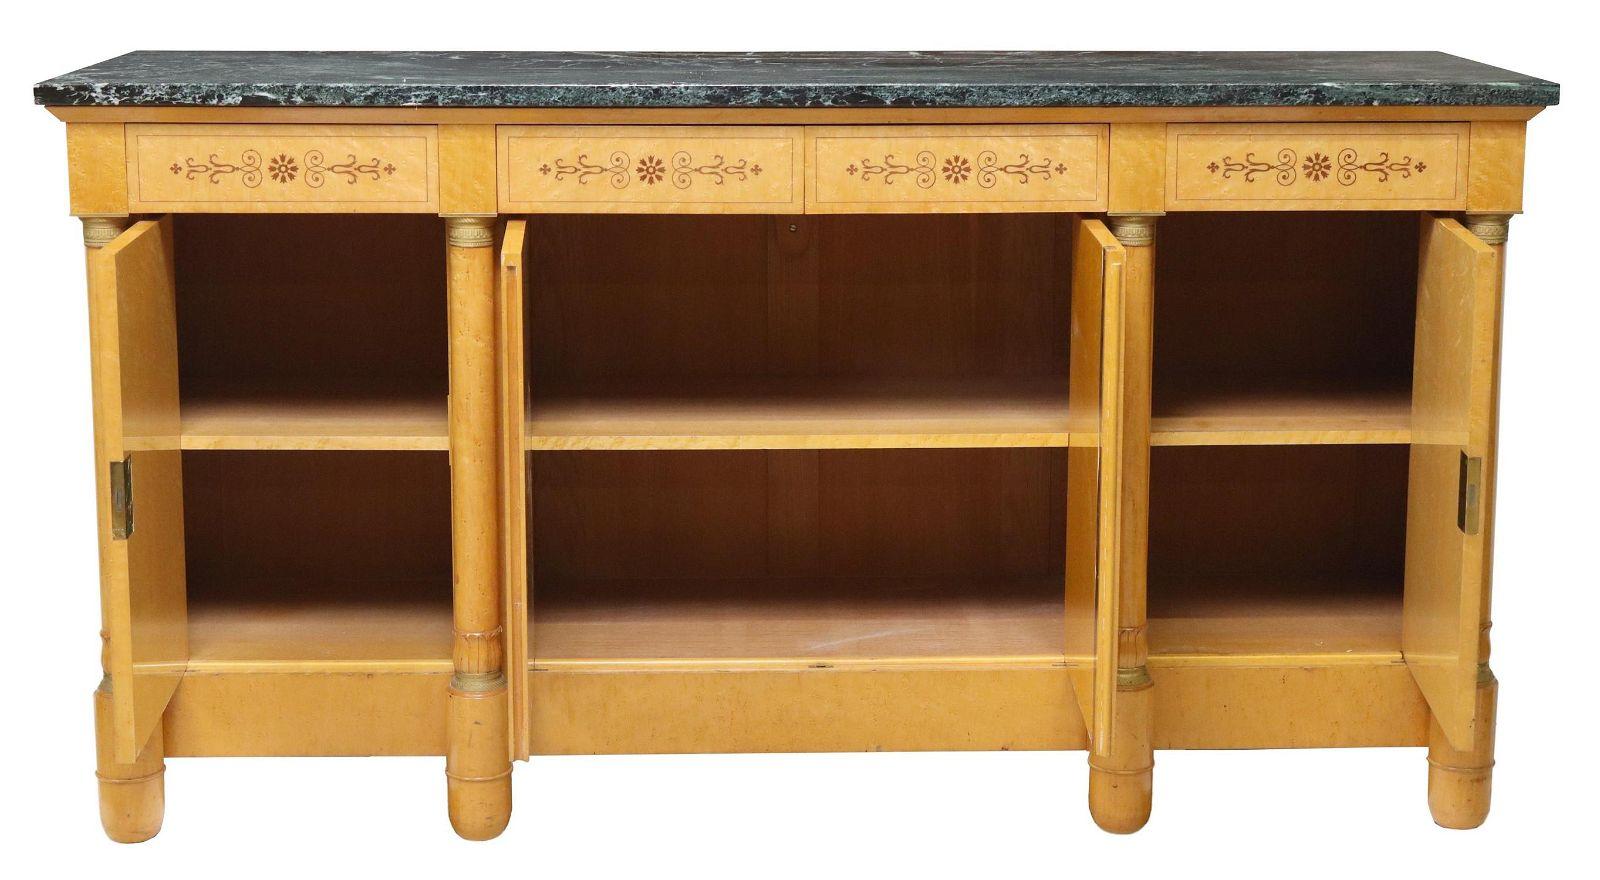 Hand-Crafted Vintage French Empire Style Green Marble-Top Birdseye Maple Sideboard For Sale